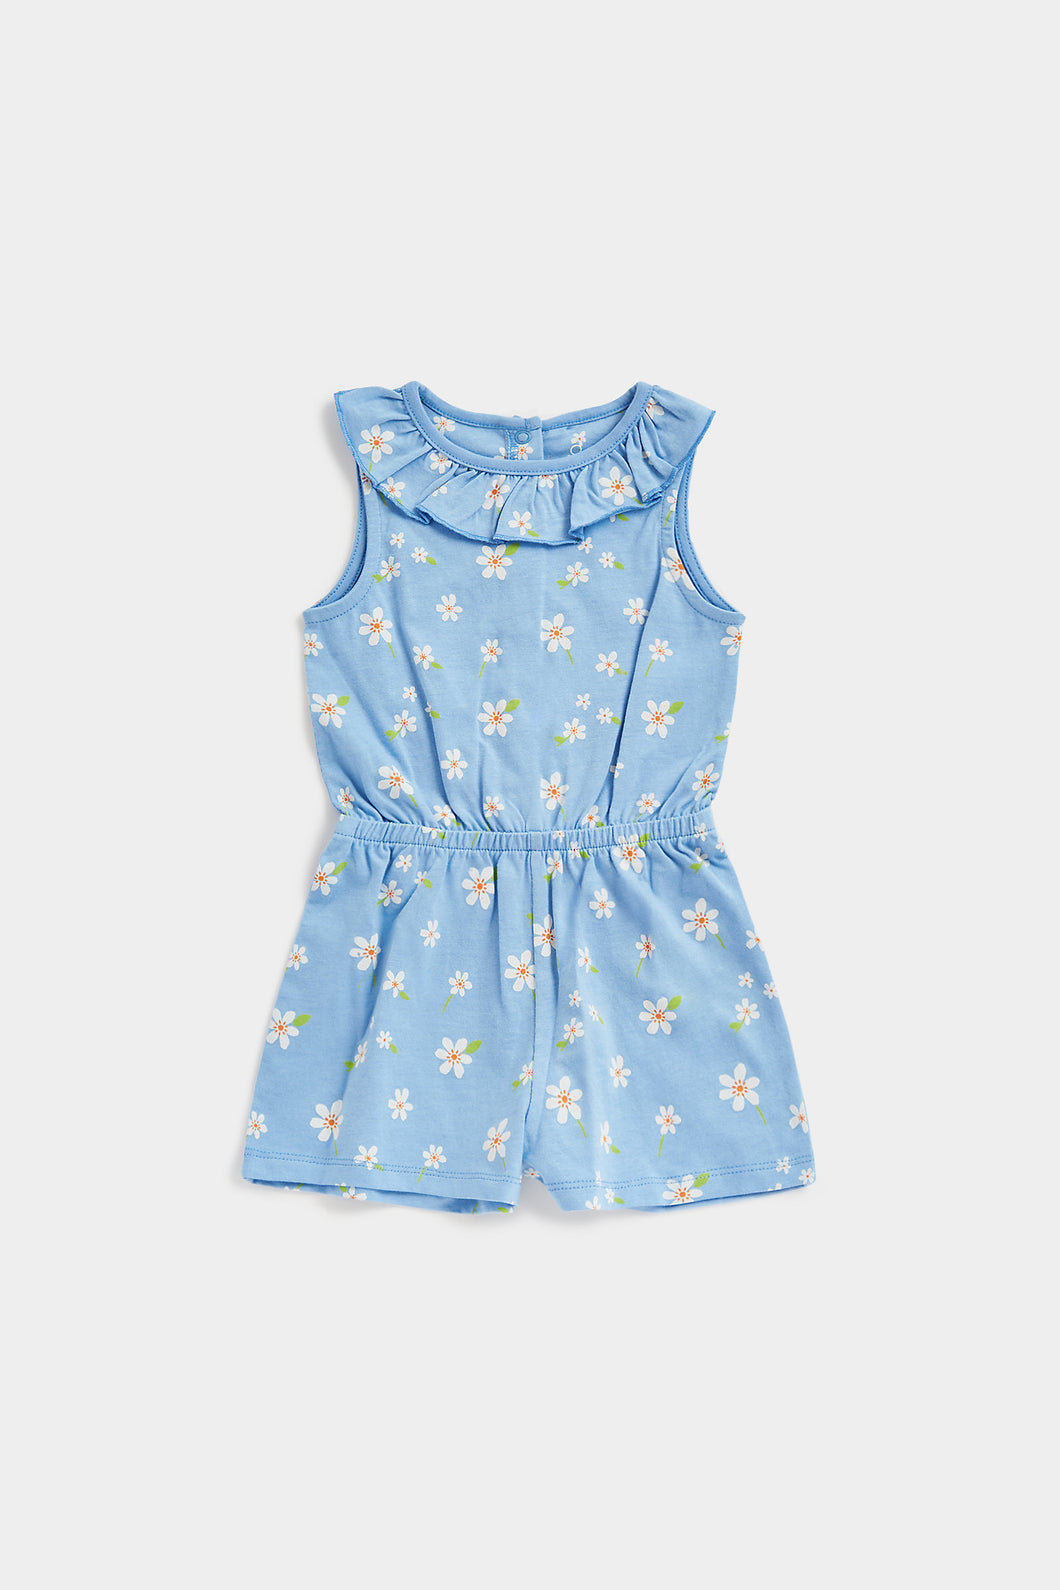 Mothercare Daisy Playsuit